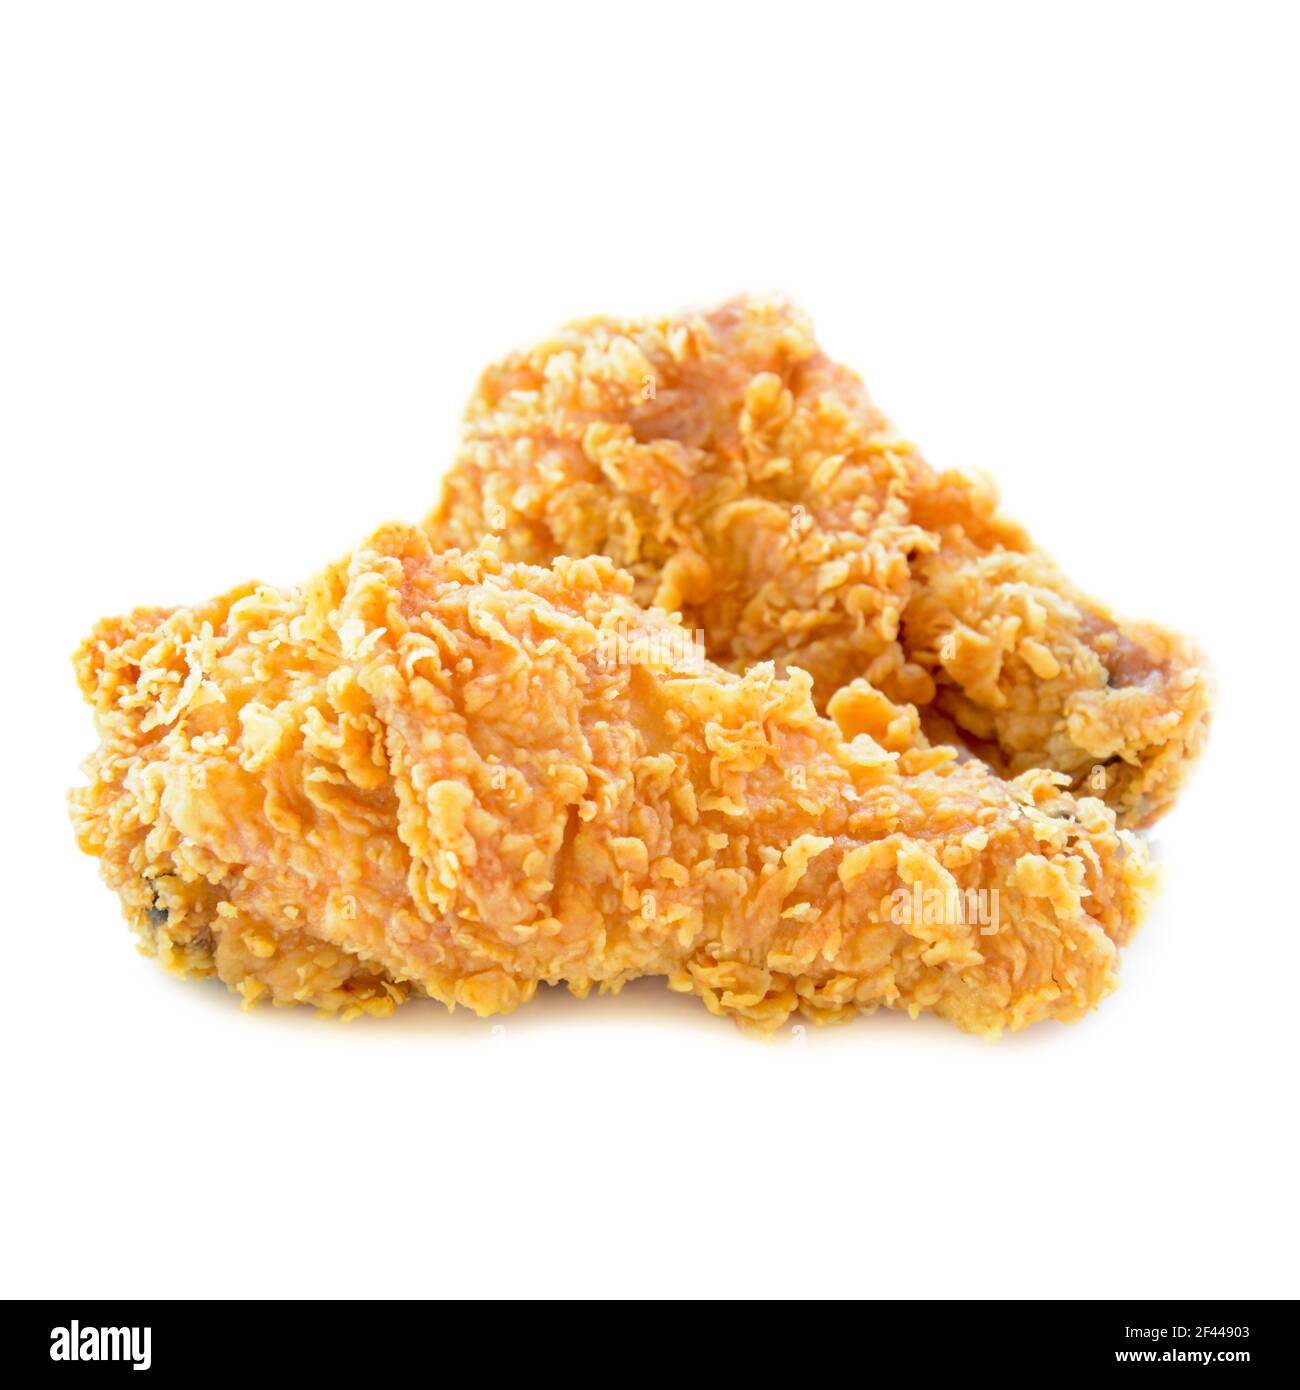 Fried chicken legs isolated on white background Stock Photo